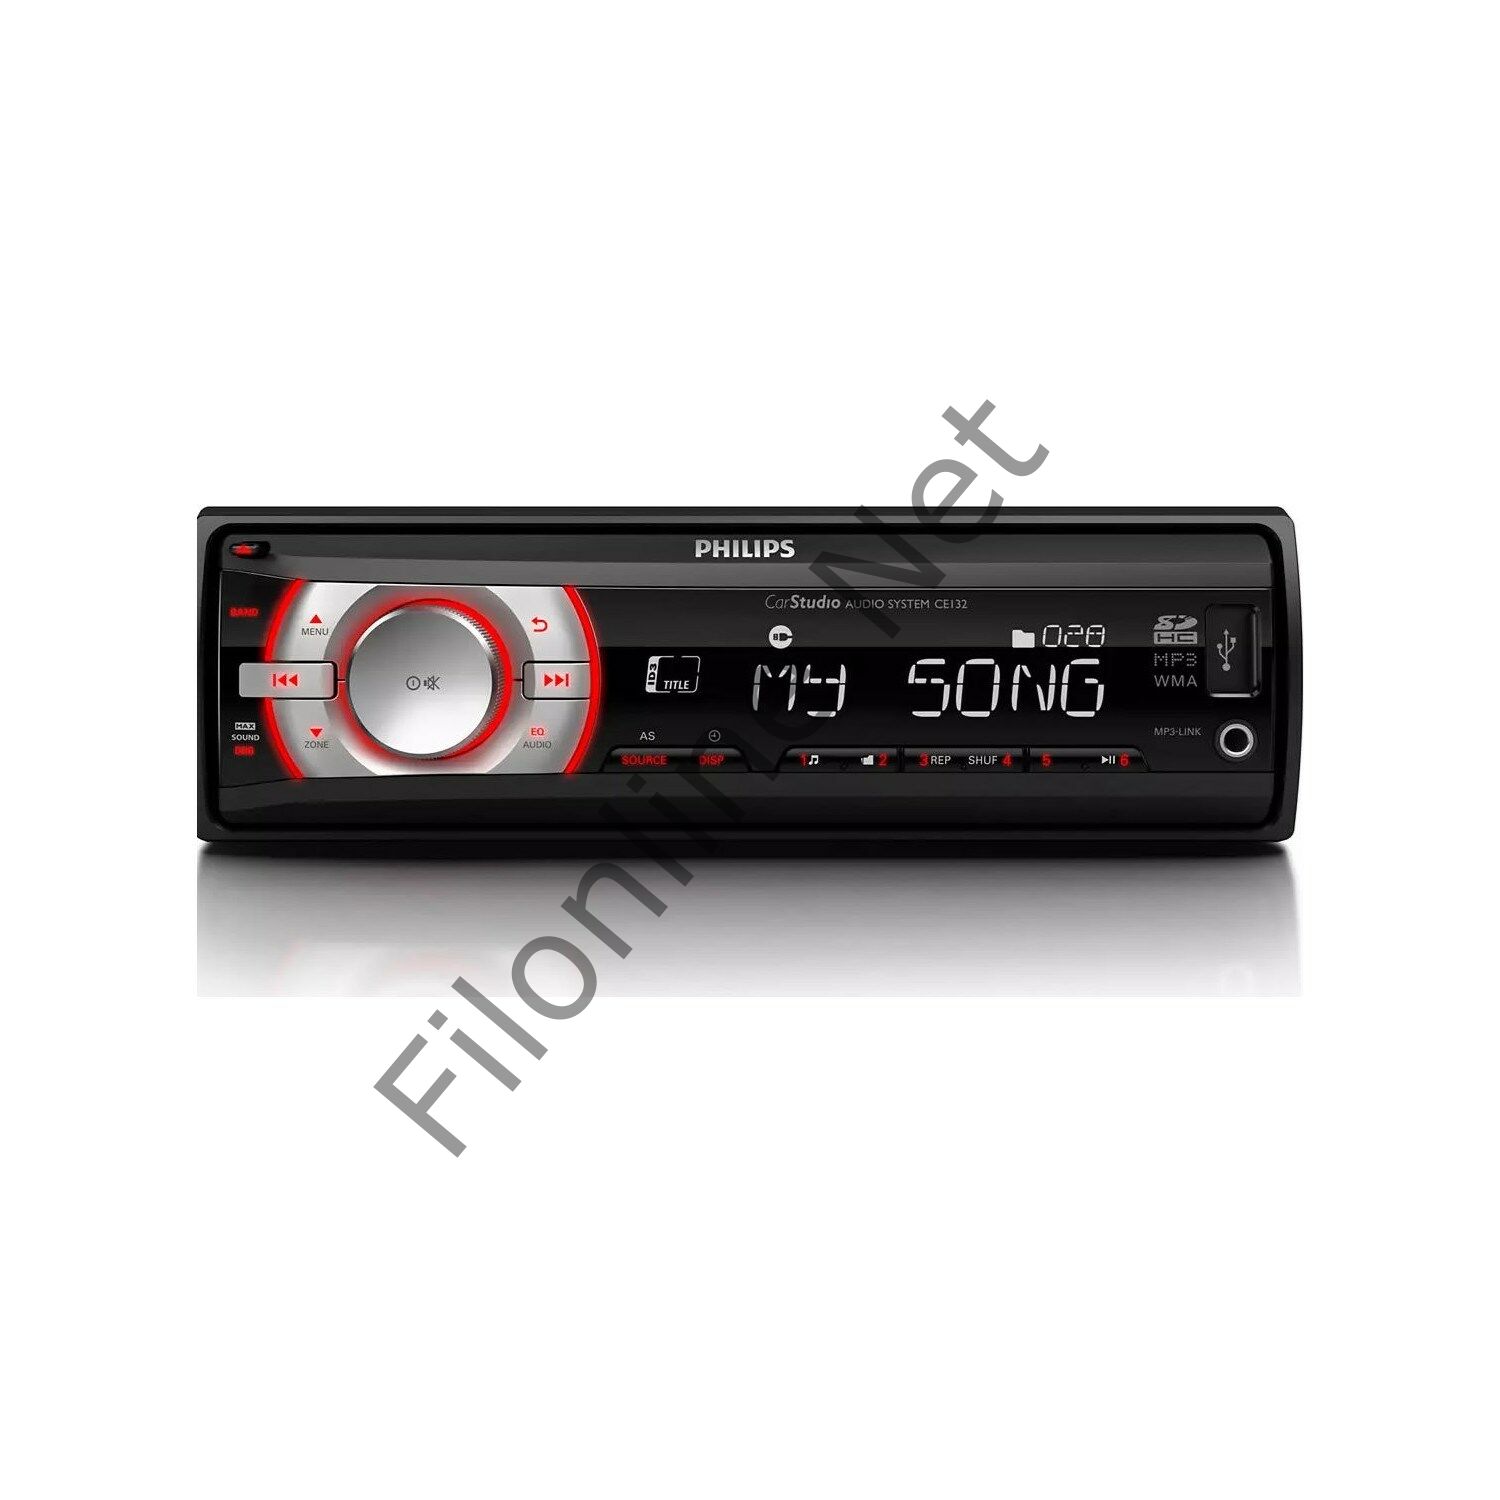 PHILIPS CE233 STEREO AM / FM / USB / AUX OTO TEYP